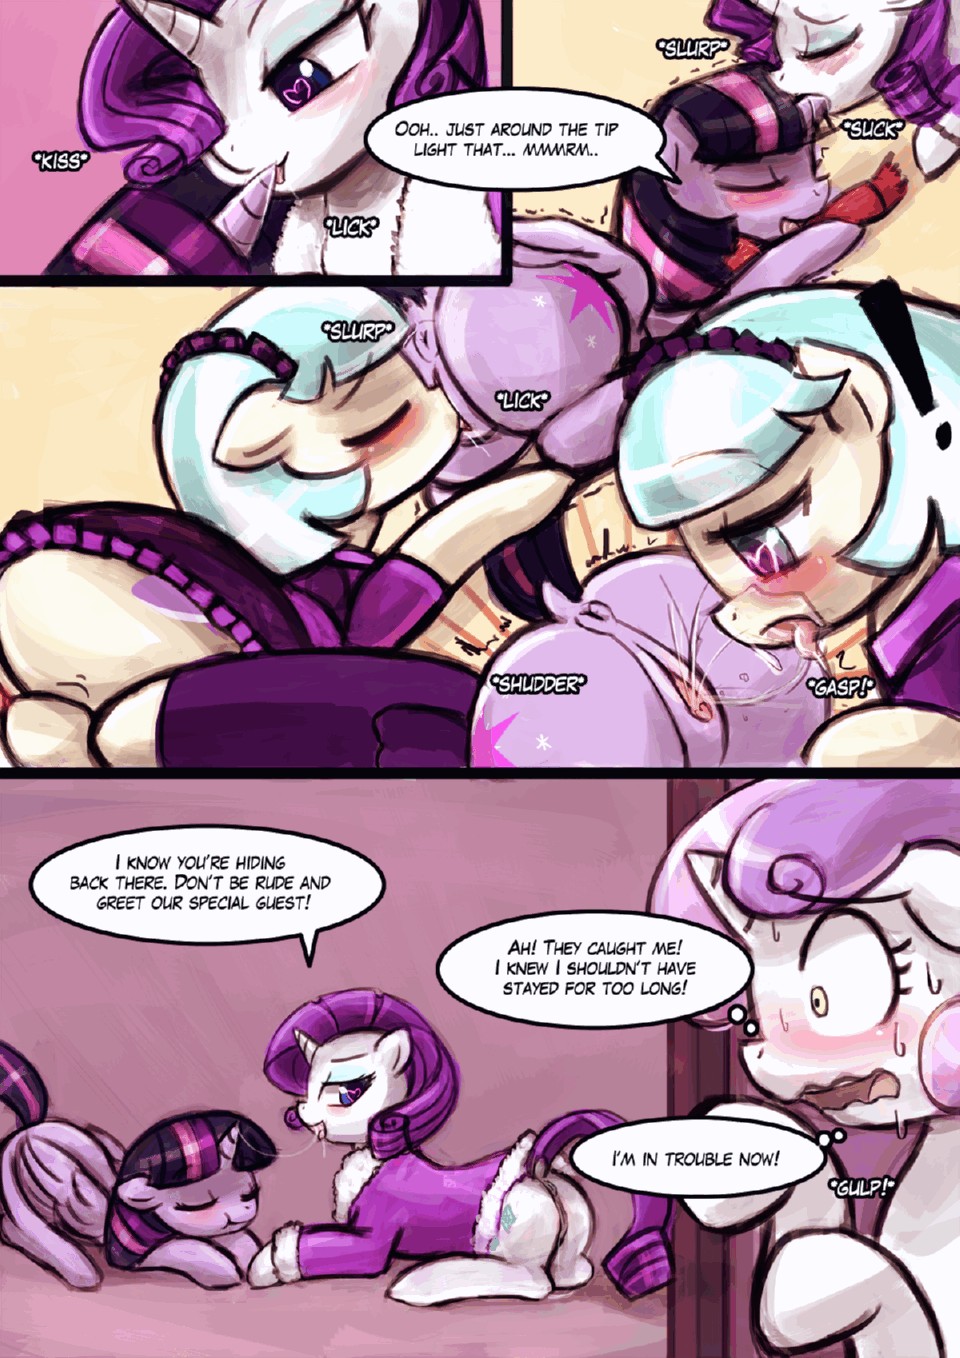 Hot Cocoa with Marshmallows porn comic page 005